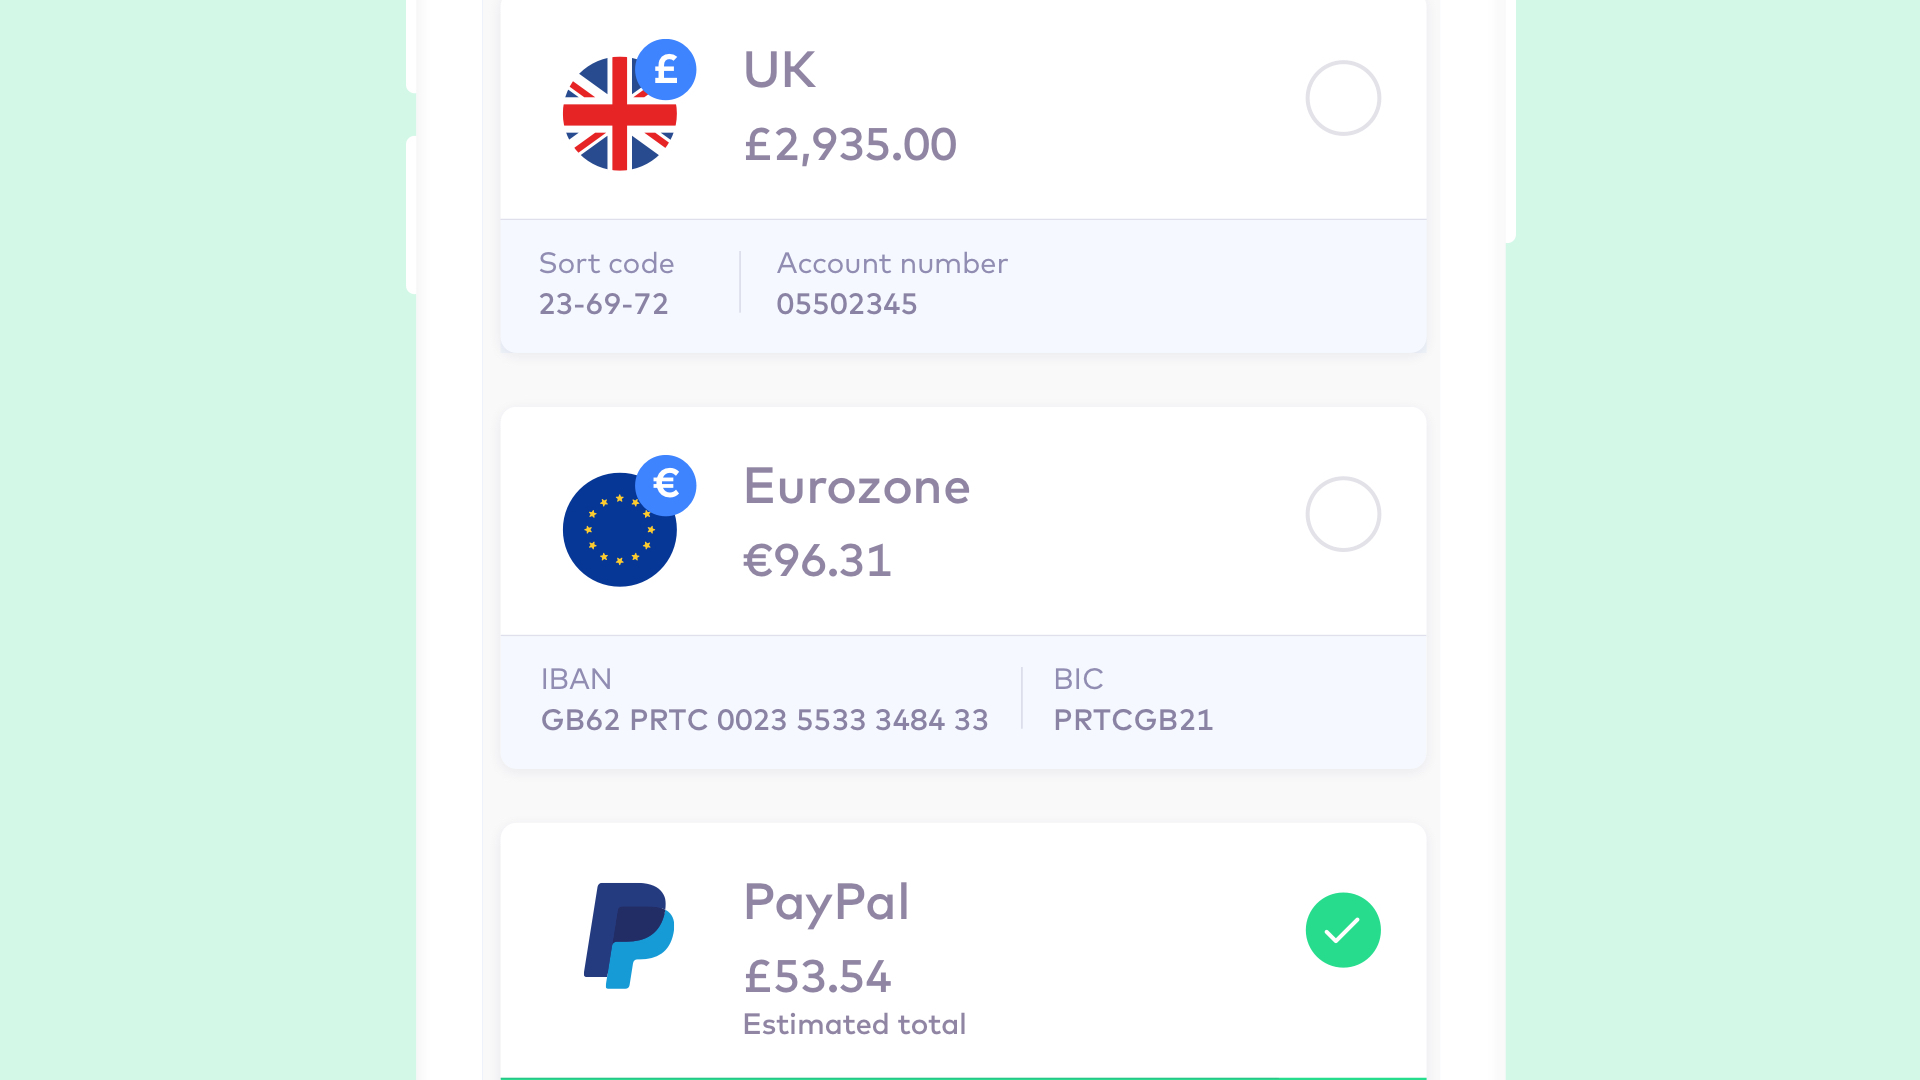 Solved: Age Limit for Paypal in UK - PayPal Community